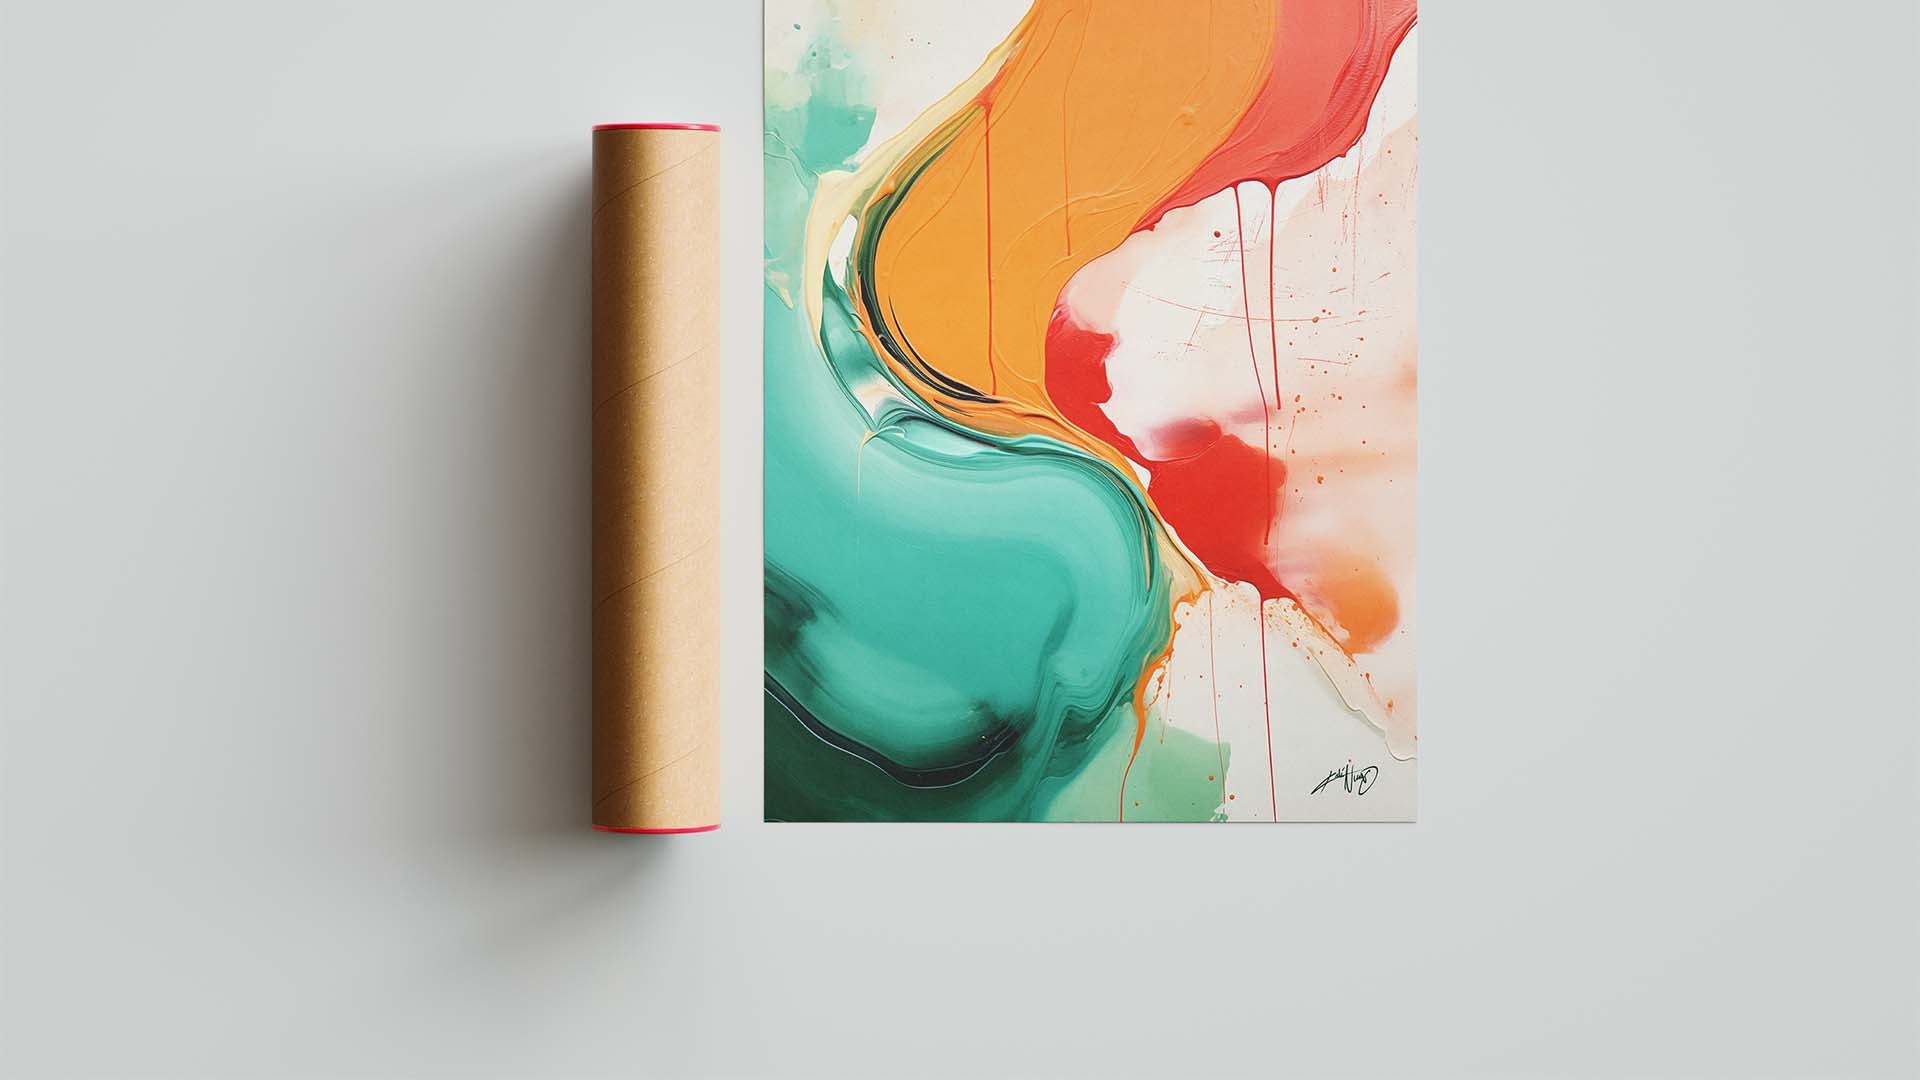 Green, red and yellow abstract art painting of fluids, next to a cardboard roll package.